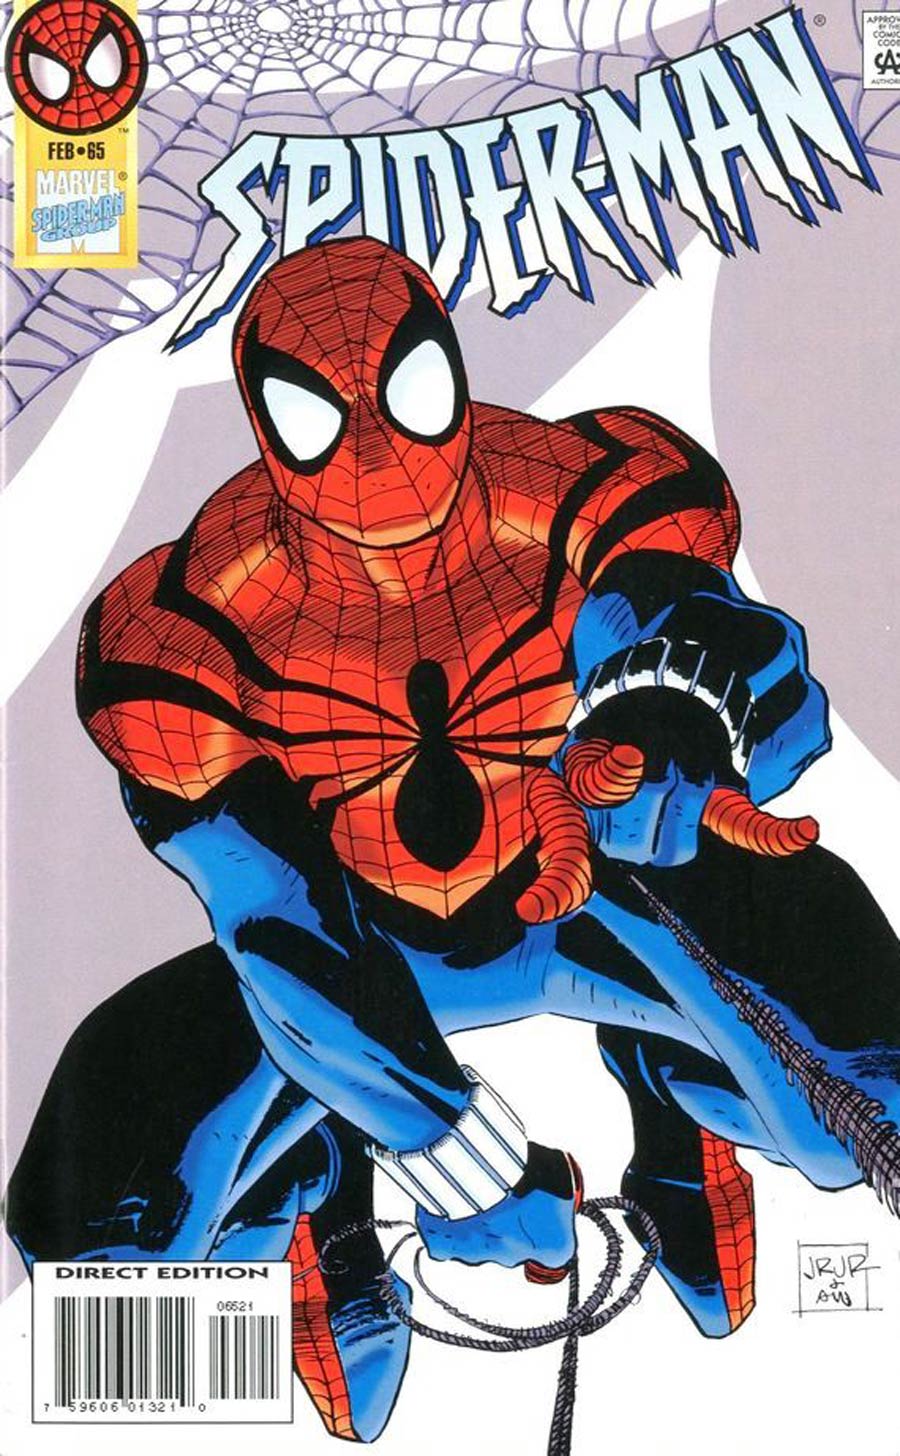 Spider-Man #65 Cover C No Polybag Without Cassette